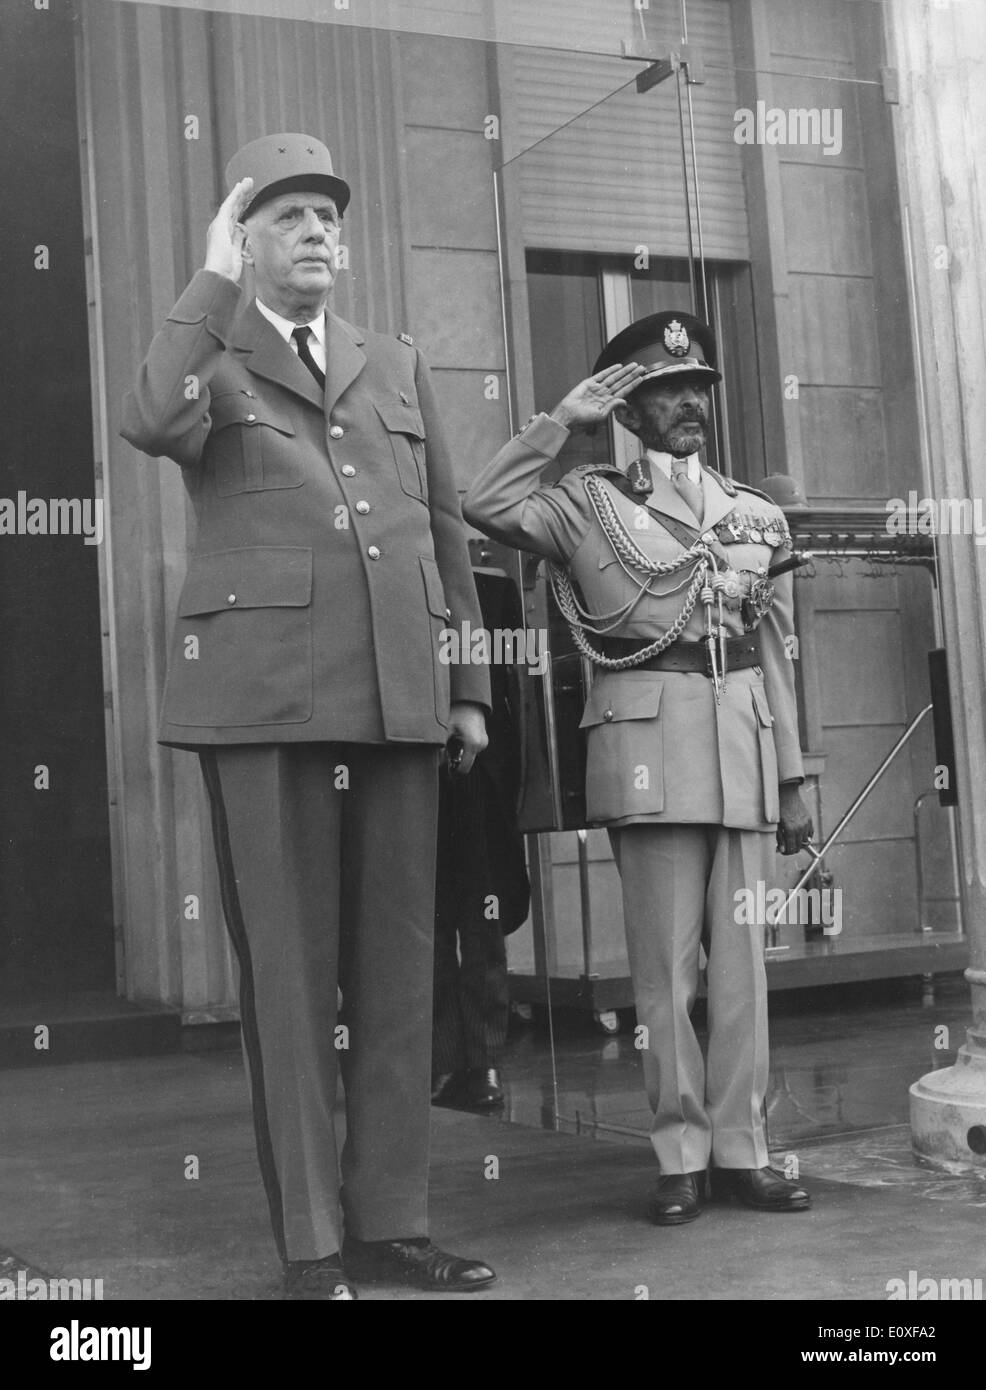 President of France CHARLES DE GAULLE salutes civilians accompanied by HAILE SELASSIE in Addis Ababa Stock Photo